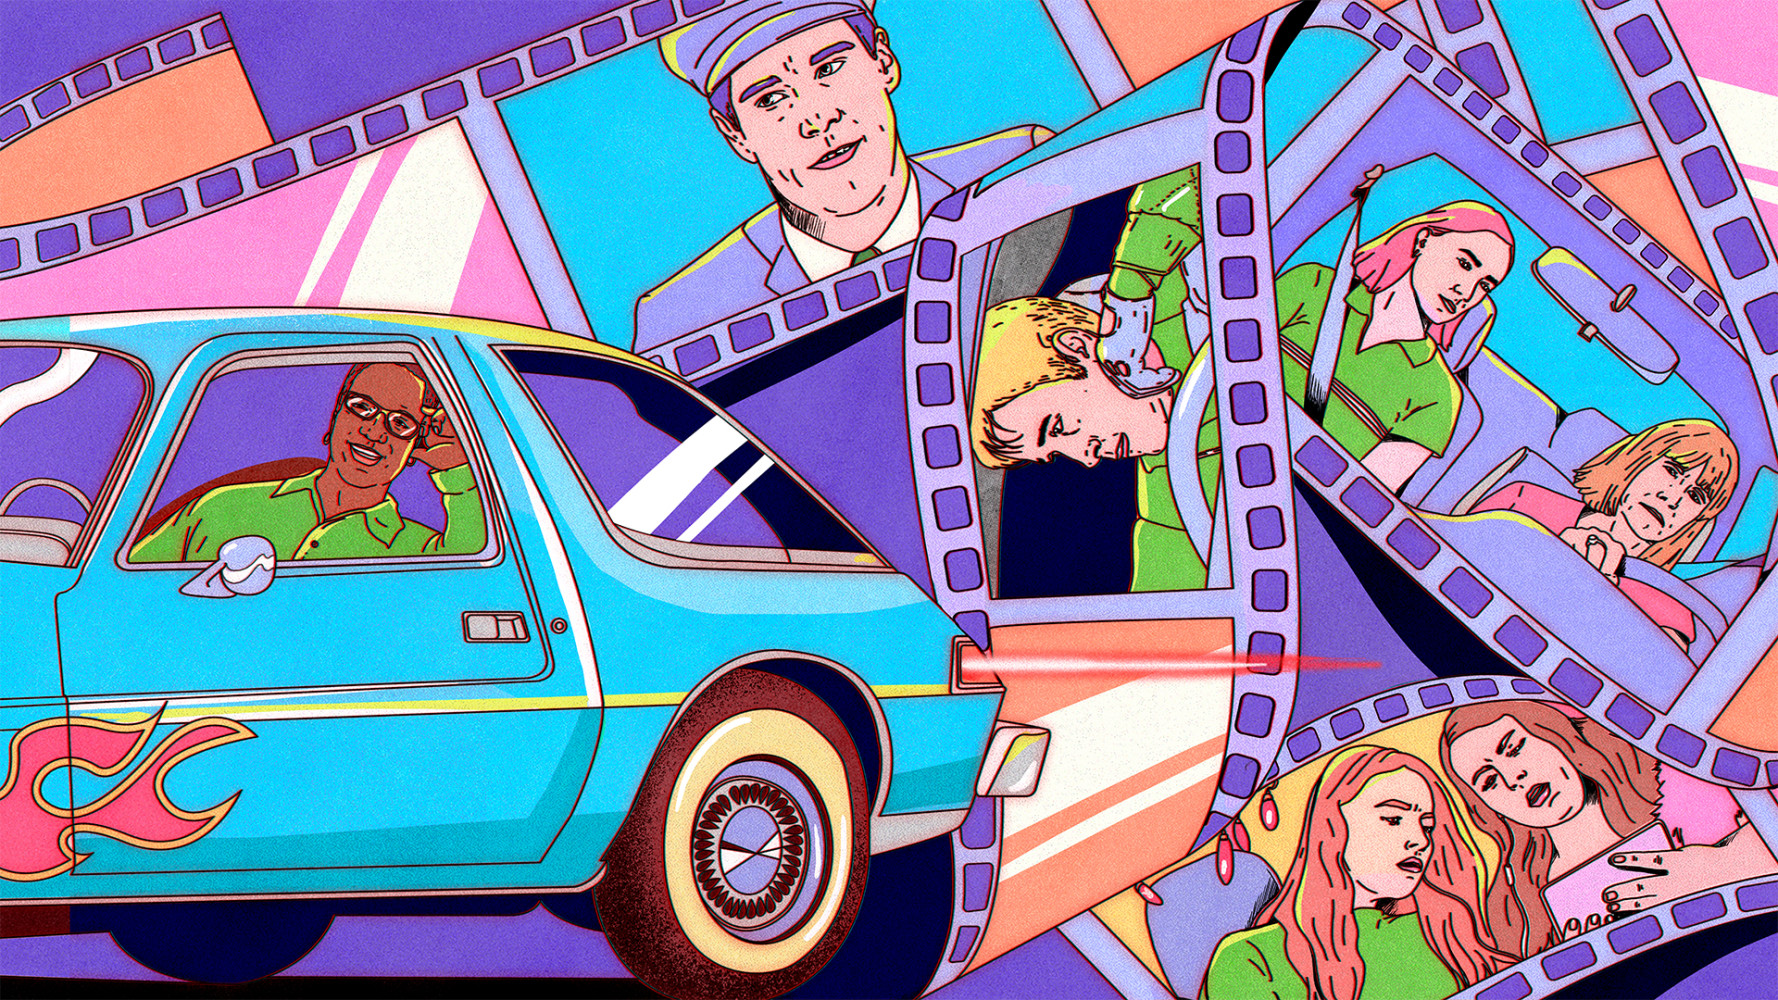 Illustration of driver in blue car and movies strips in the background featuring various car scenes from movies.